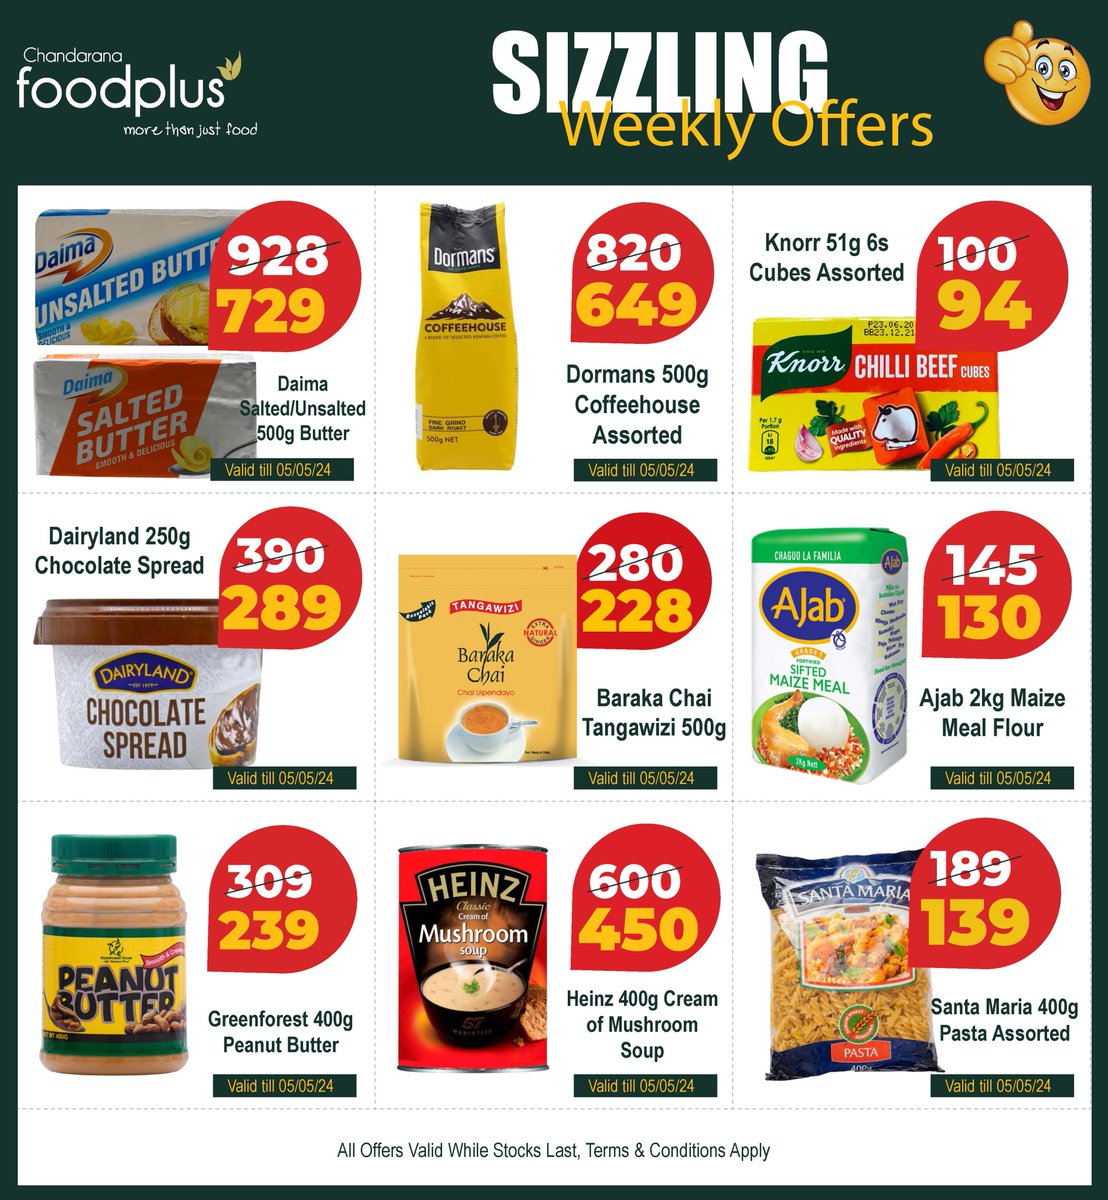 Your weekly savings guide is back! And its Sizzling! With yet another updated list of offers 🤩 Whether you’re planning a family gathering or a cozy night in, shop smart and save with our Friday unbeatable offers! 🔥#Chandaranafoodplus #fridayoffers #SmartShopping